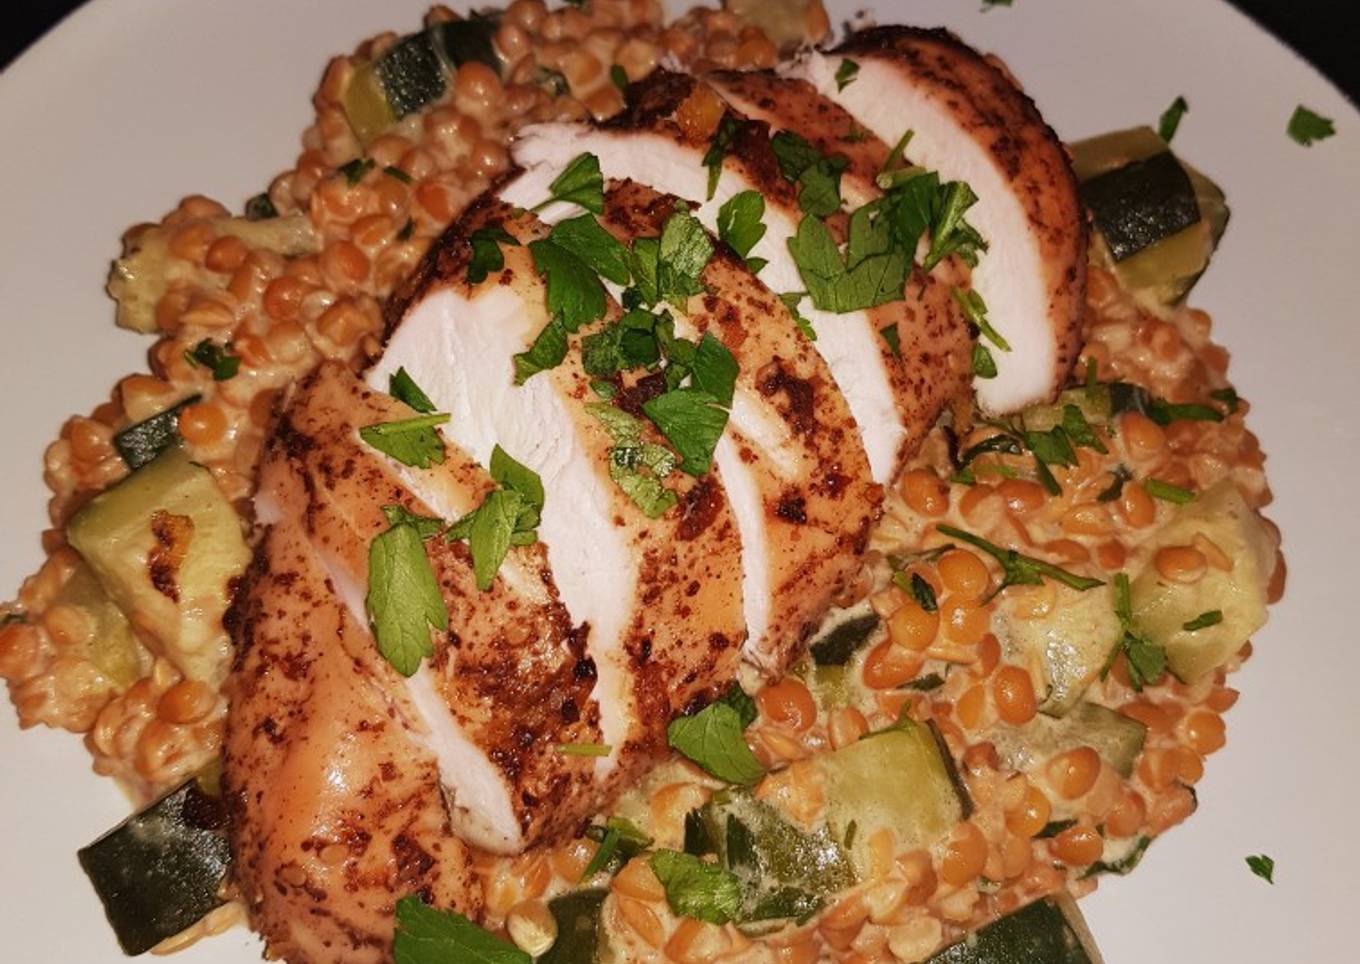 Zahtar spiced chicken with creamy lentils and cougette